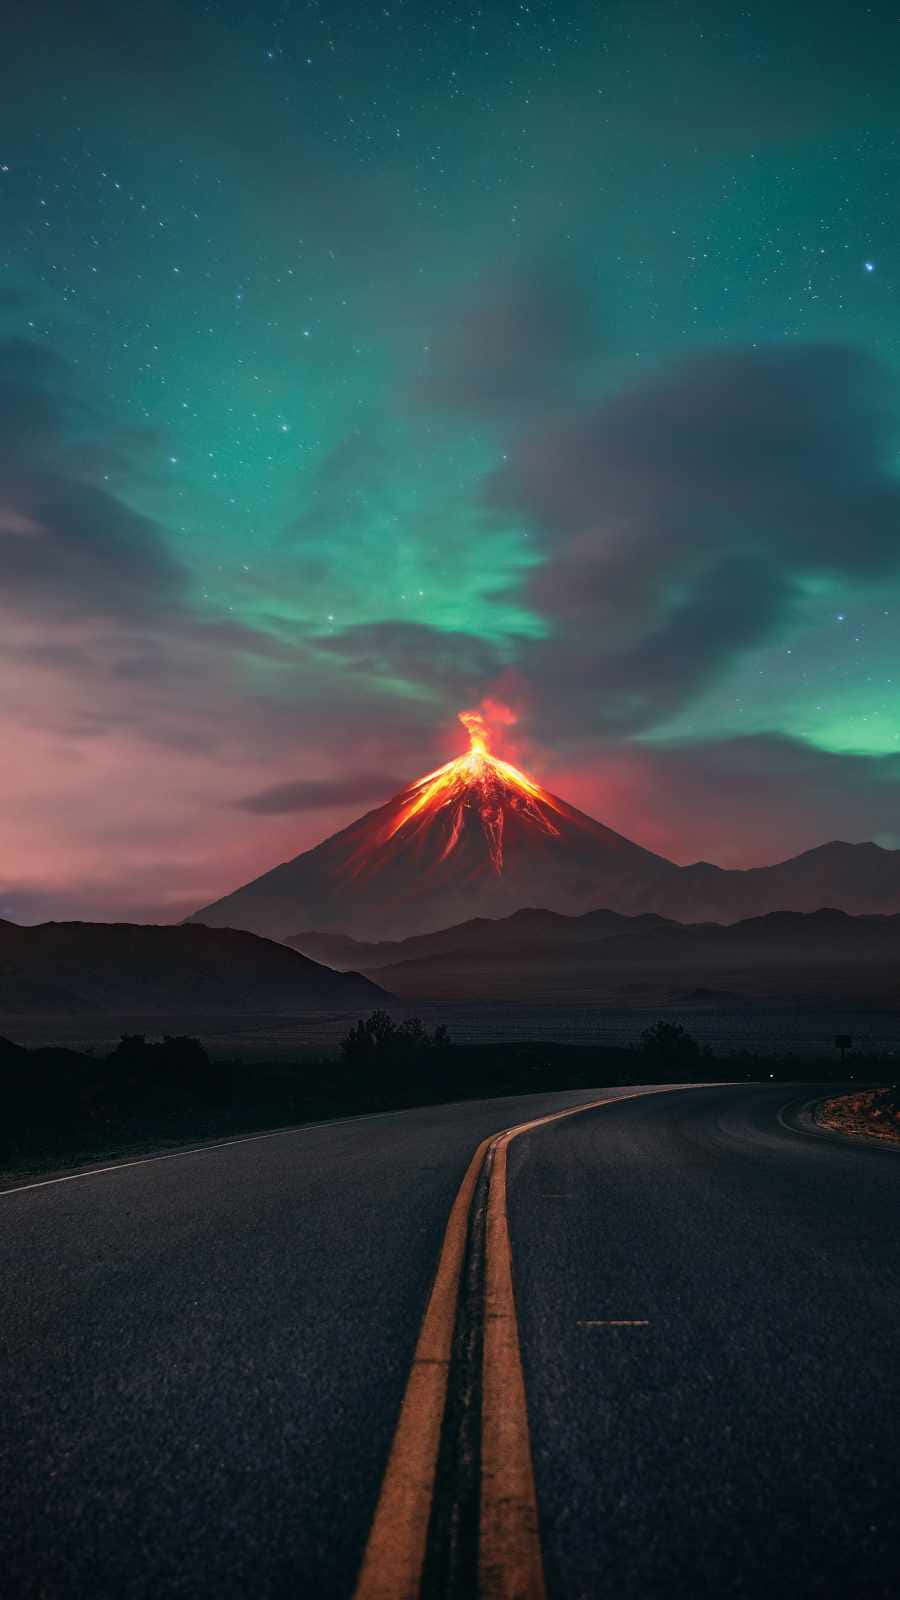 Awe-inspiring Image Of A Road Trip To An Active Volcano Background